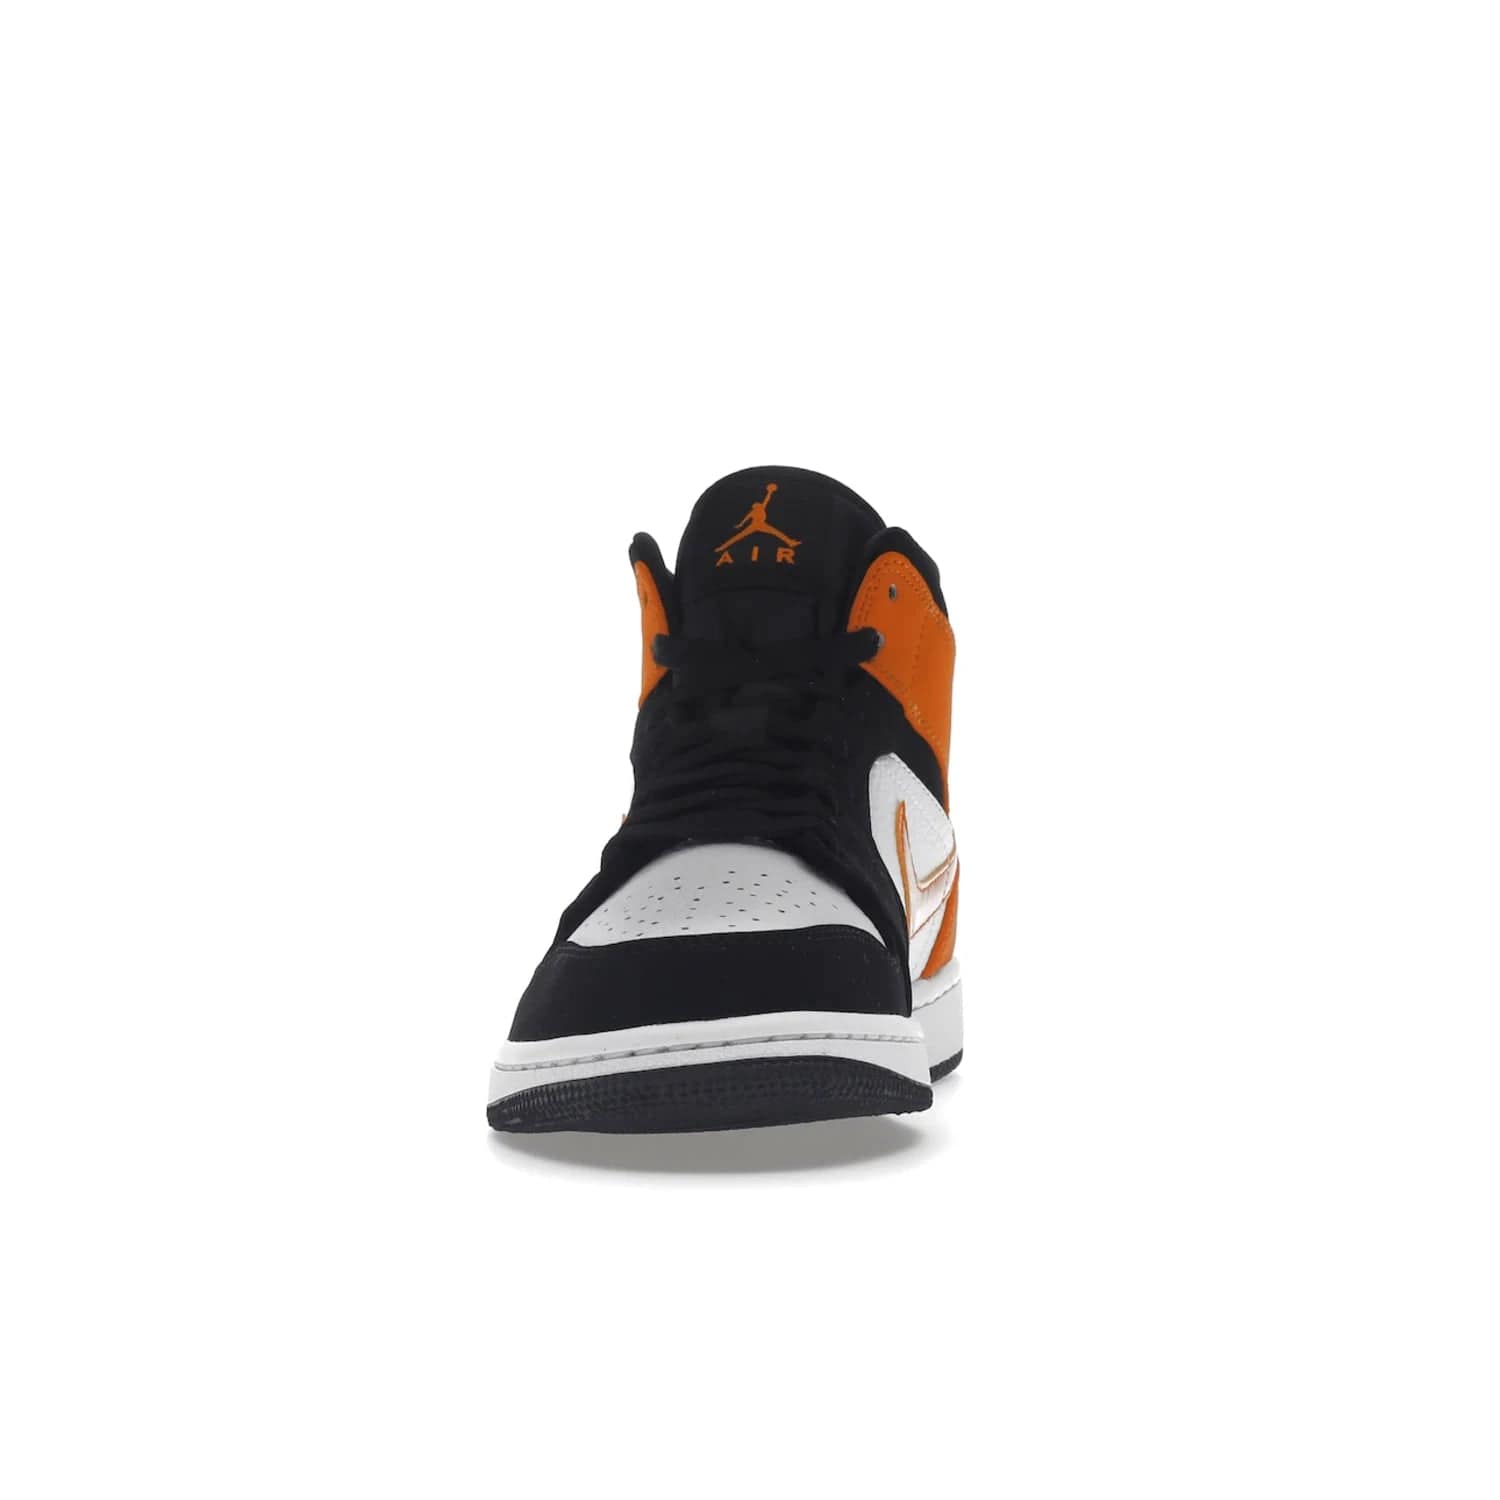 Jordan 1 Mid Shattered Backboard - Image 11 - Only at www.BallersClubKickz.com - The Air Jordan 1 Mid Shattered Backboard offers a timeless Black/White-Starfish colorway. Classic Swoosh logo and AJ insignia plus a shatterd backboard graphic on the insole. Get your pair today!